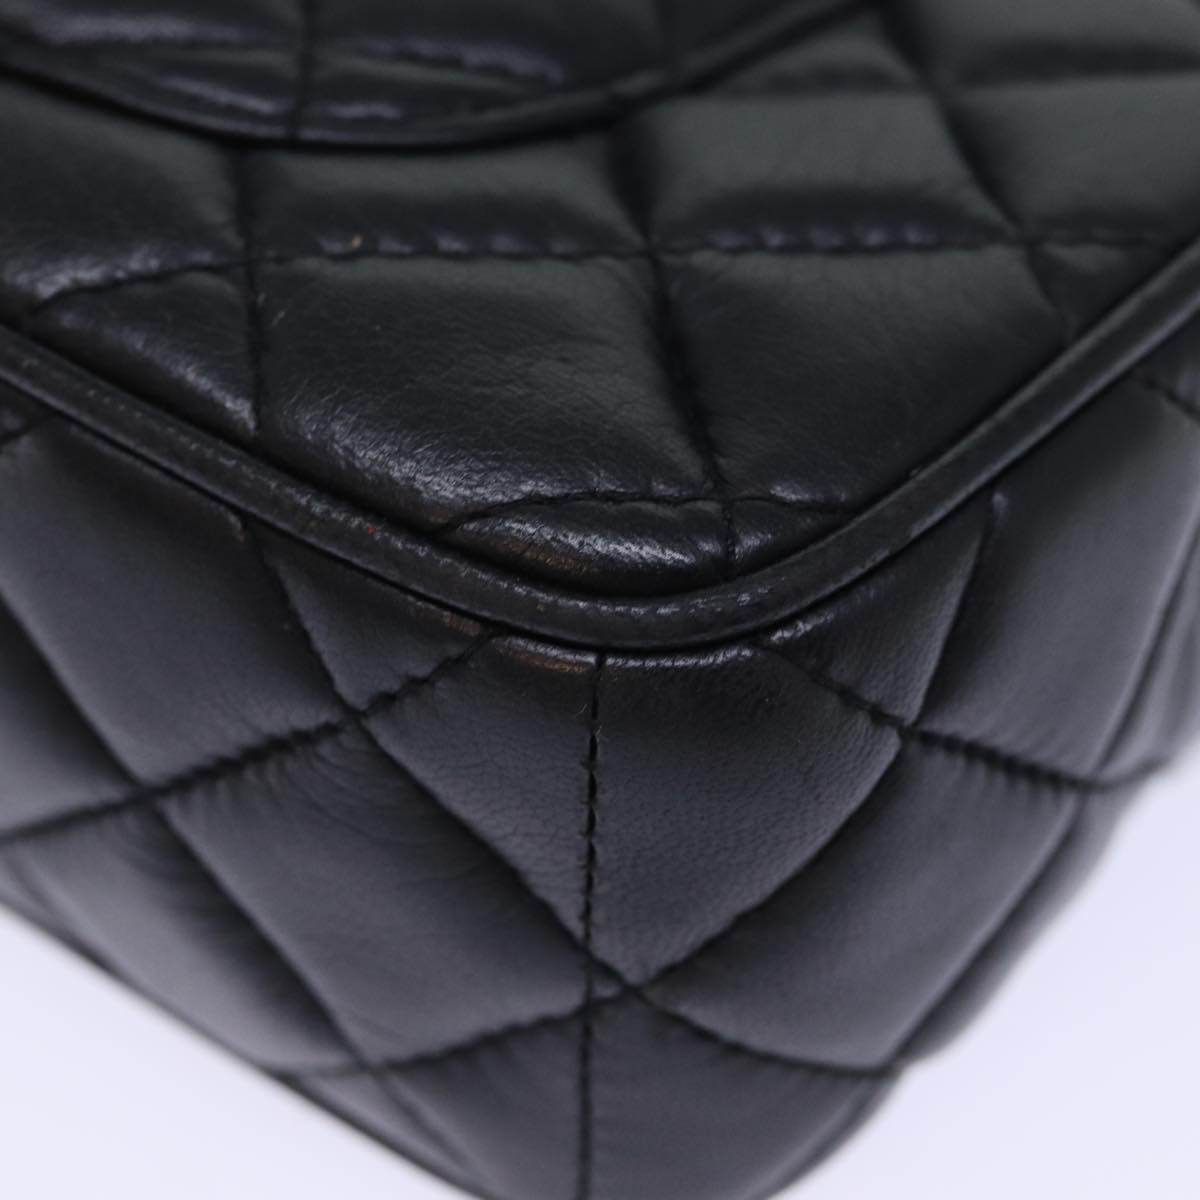 GIVENCHY Quilted Chain Shoulder Bag Leather Black Auth yk12231